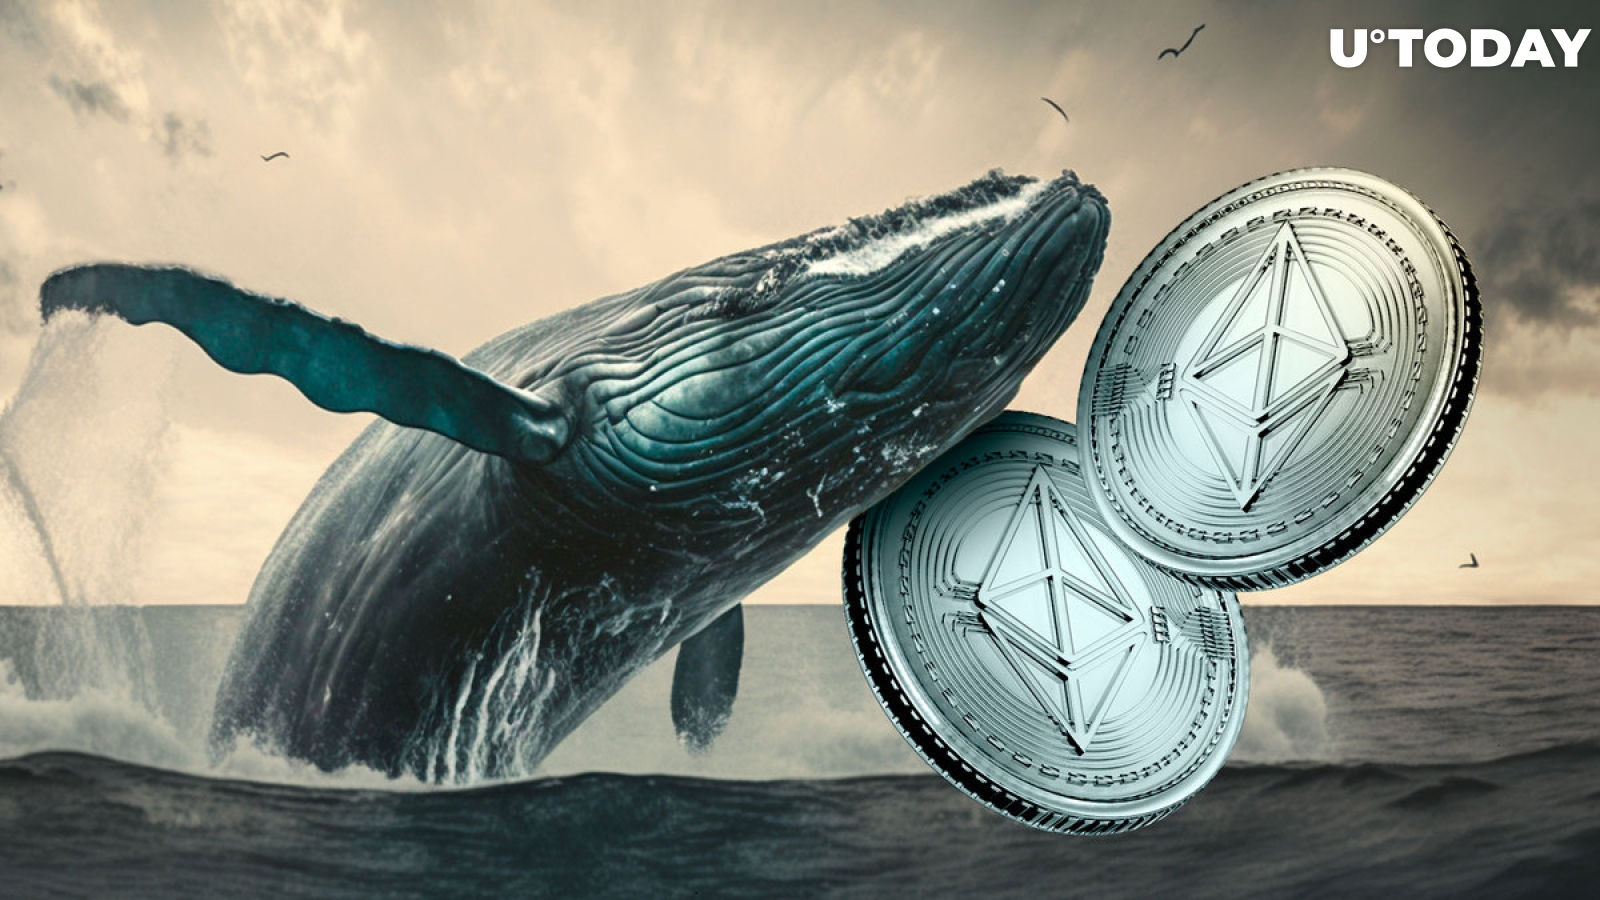 Ethereum Whales Dumping ETH Hard: Report